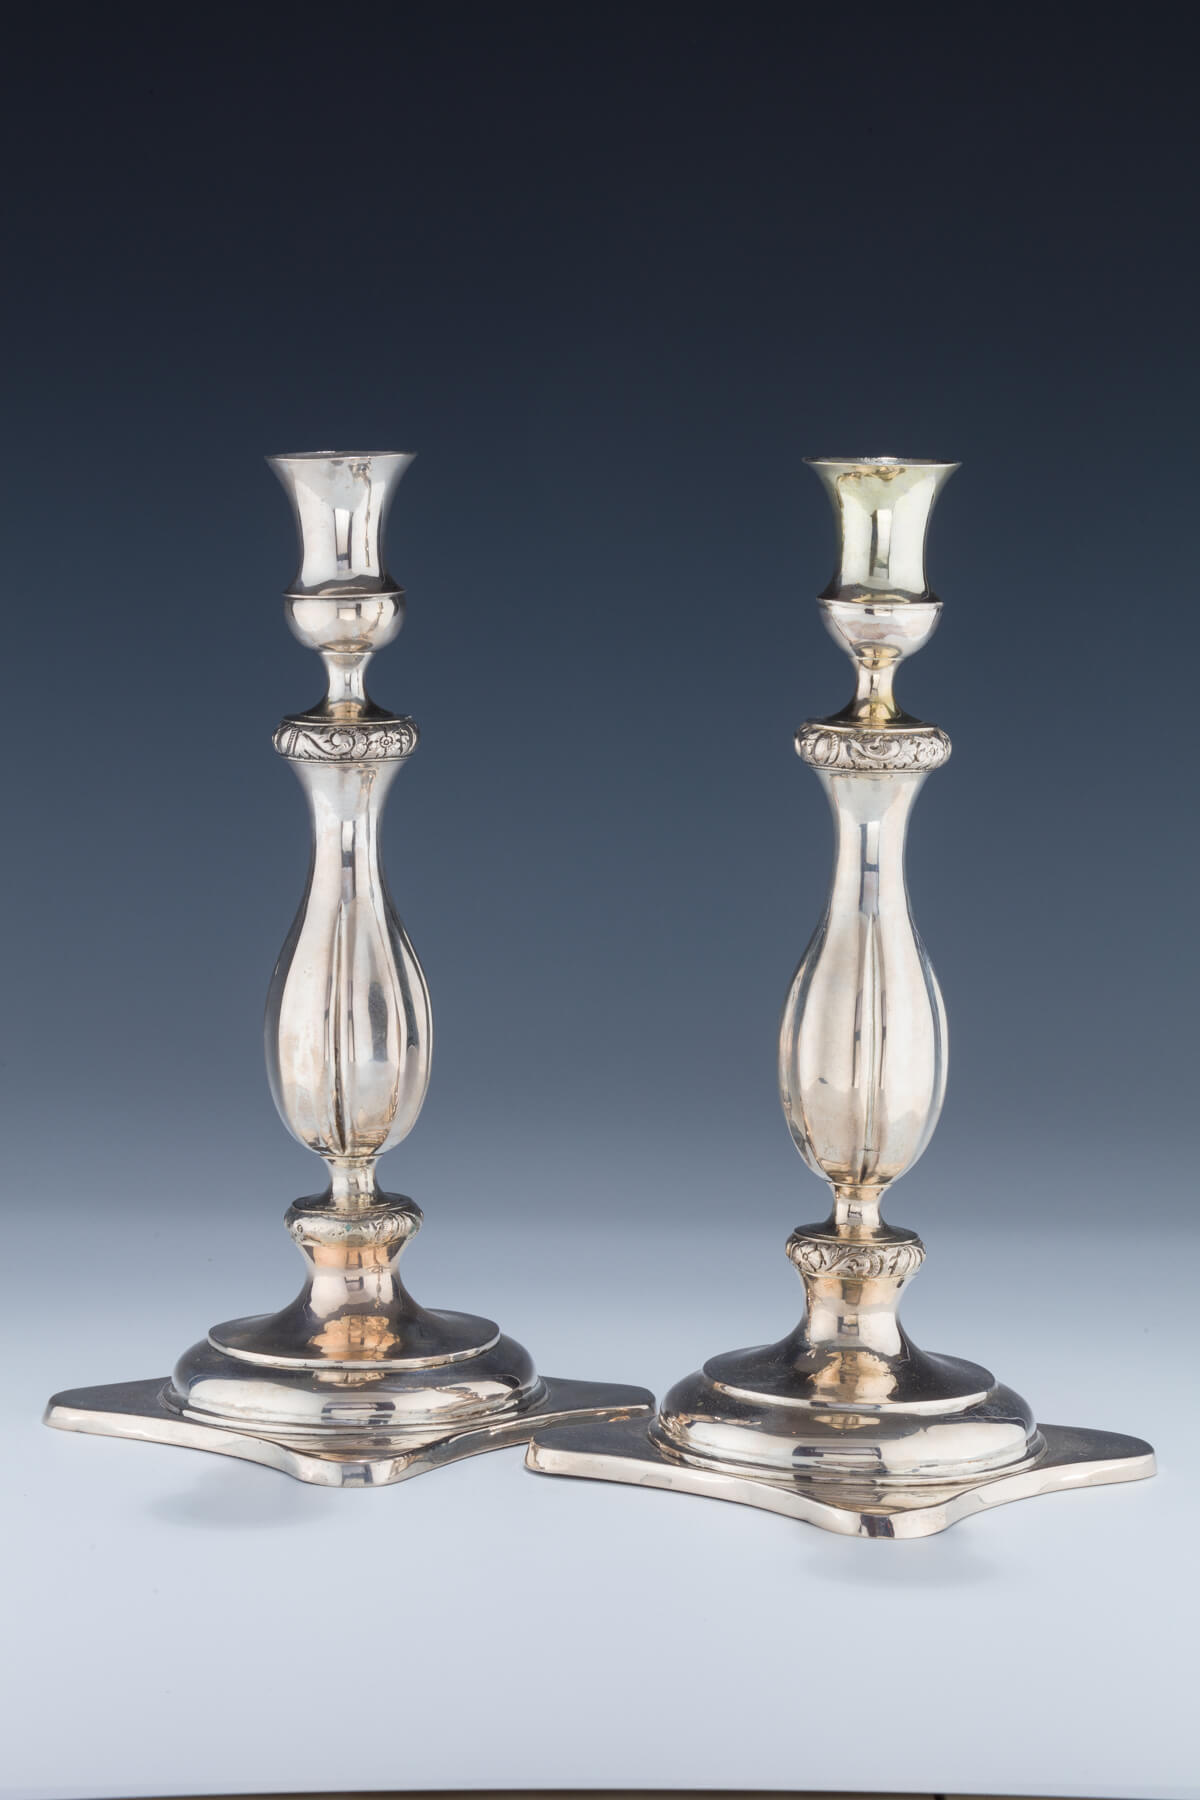 077. A Pair of Silver Candlesticks